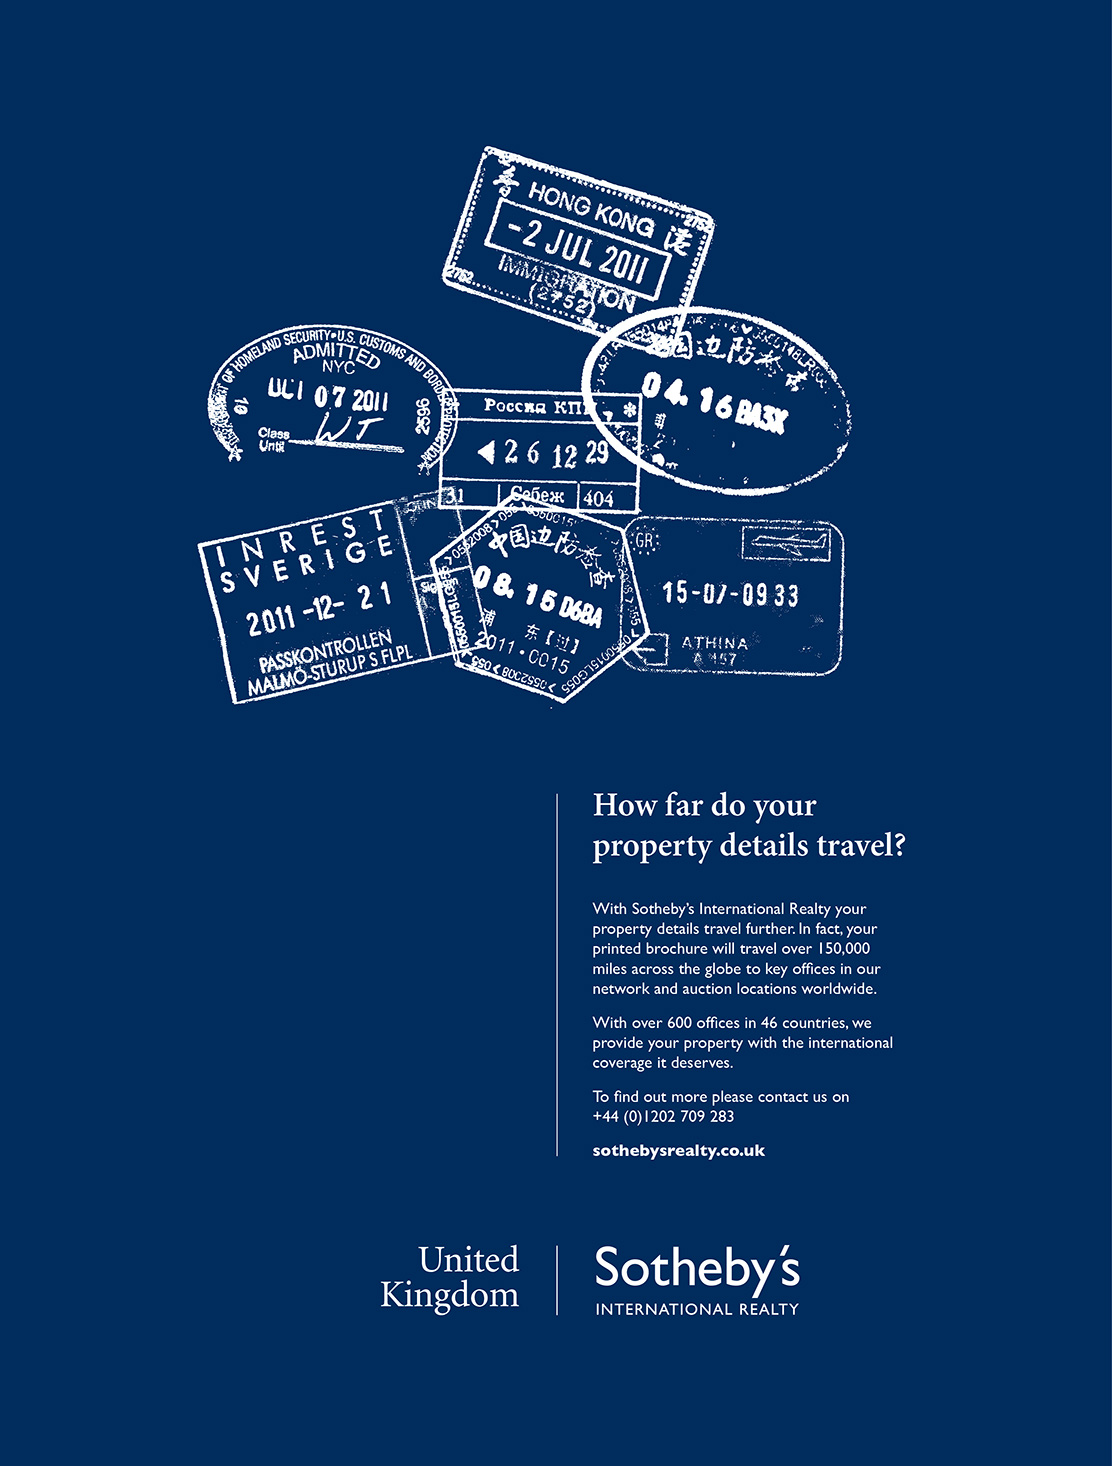 Sothebys advertising campaign